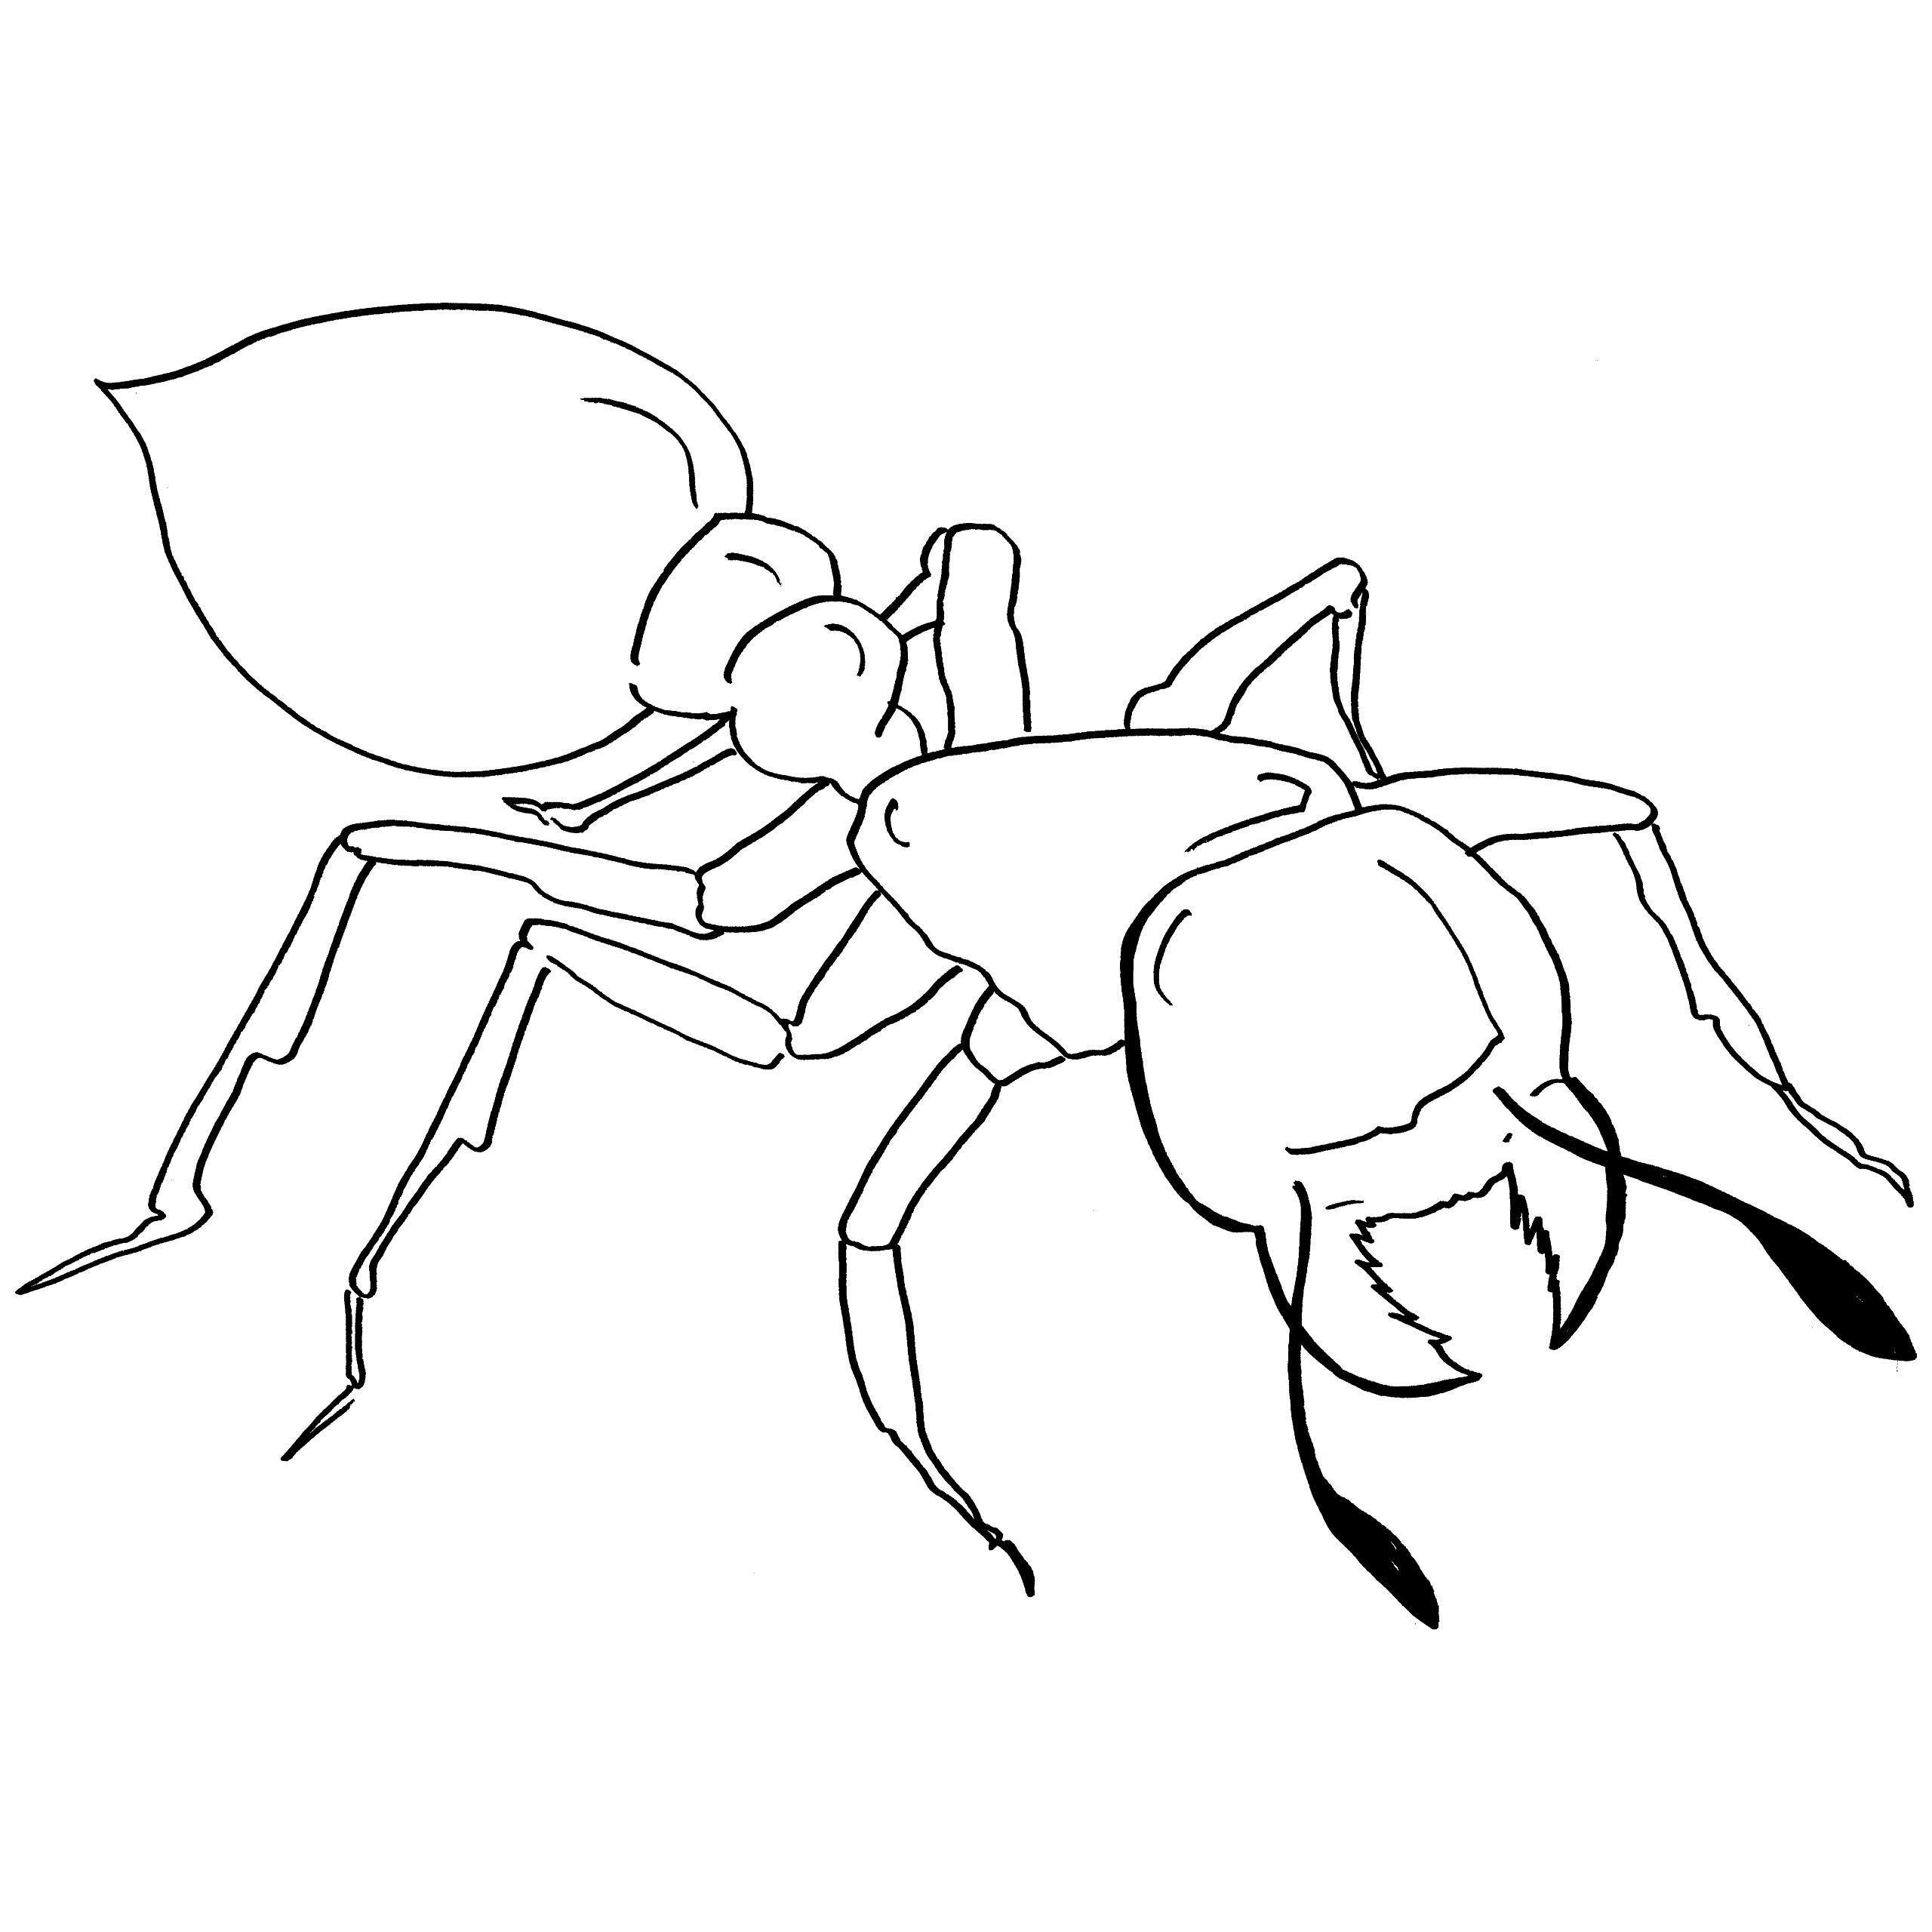 Ant Line Drawing at GetDrawings Free download